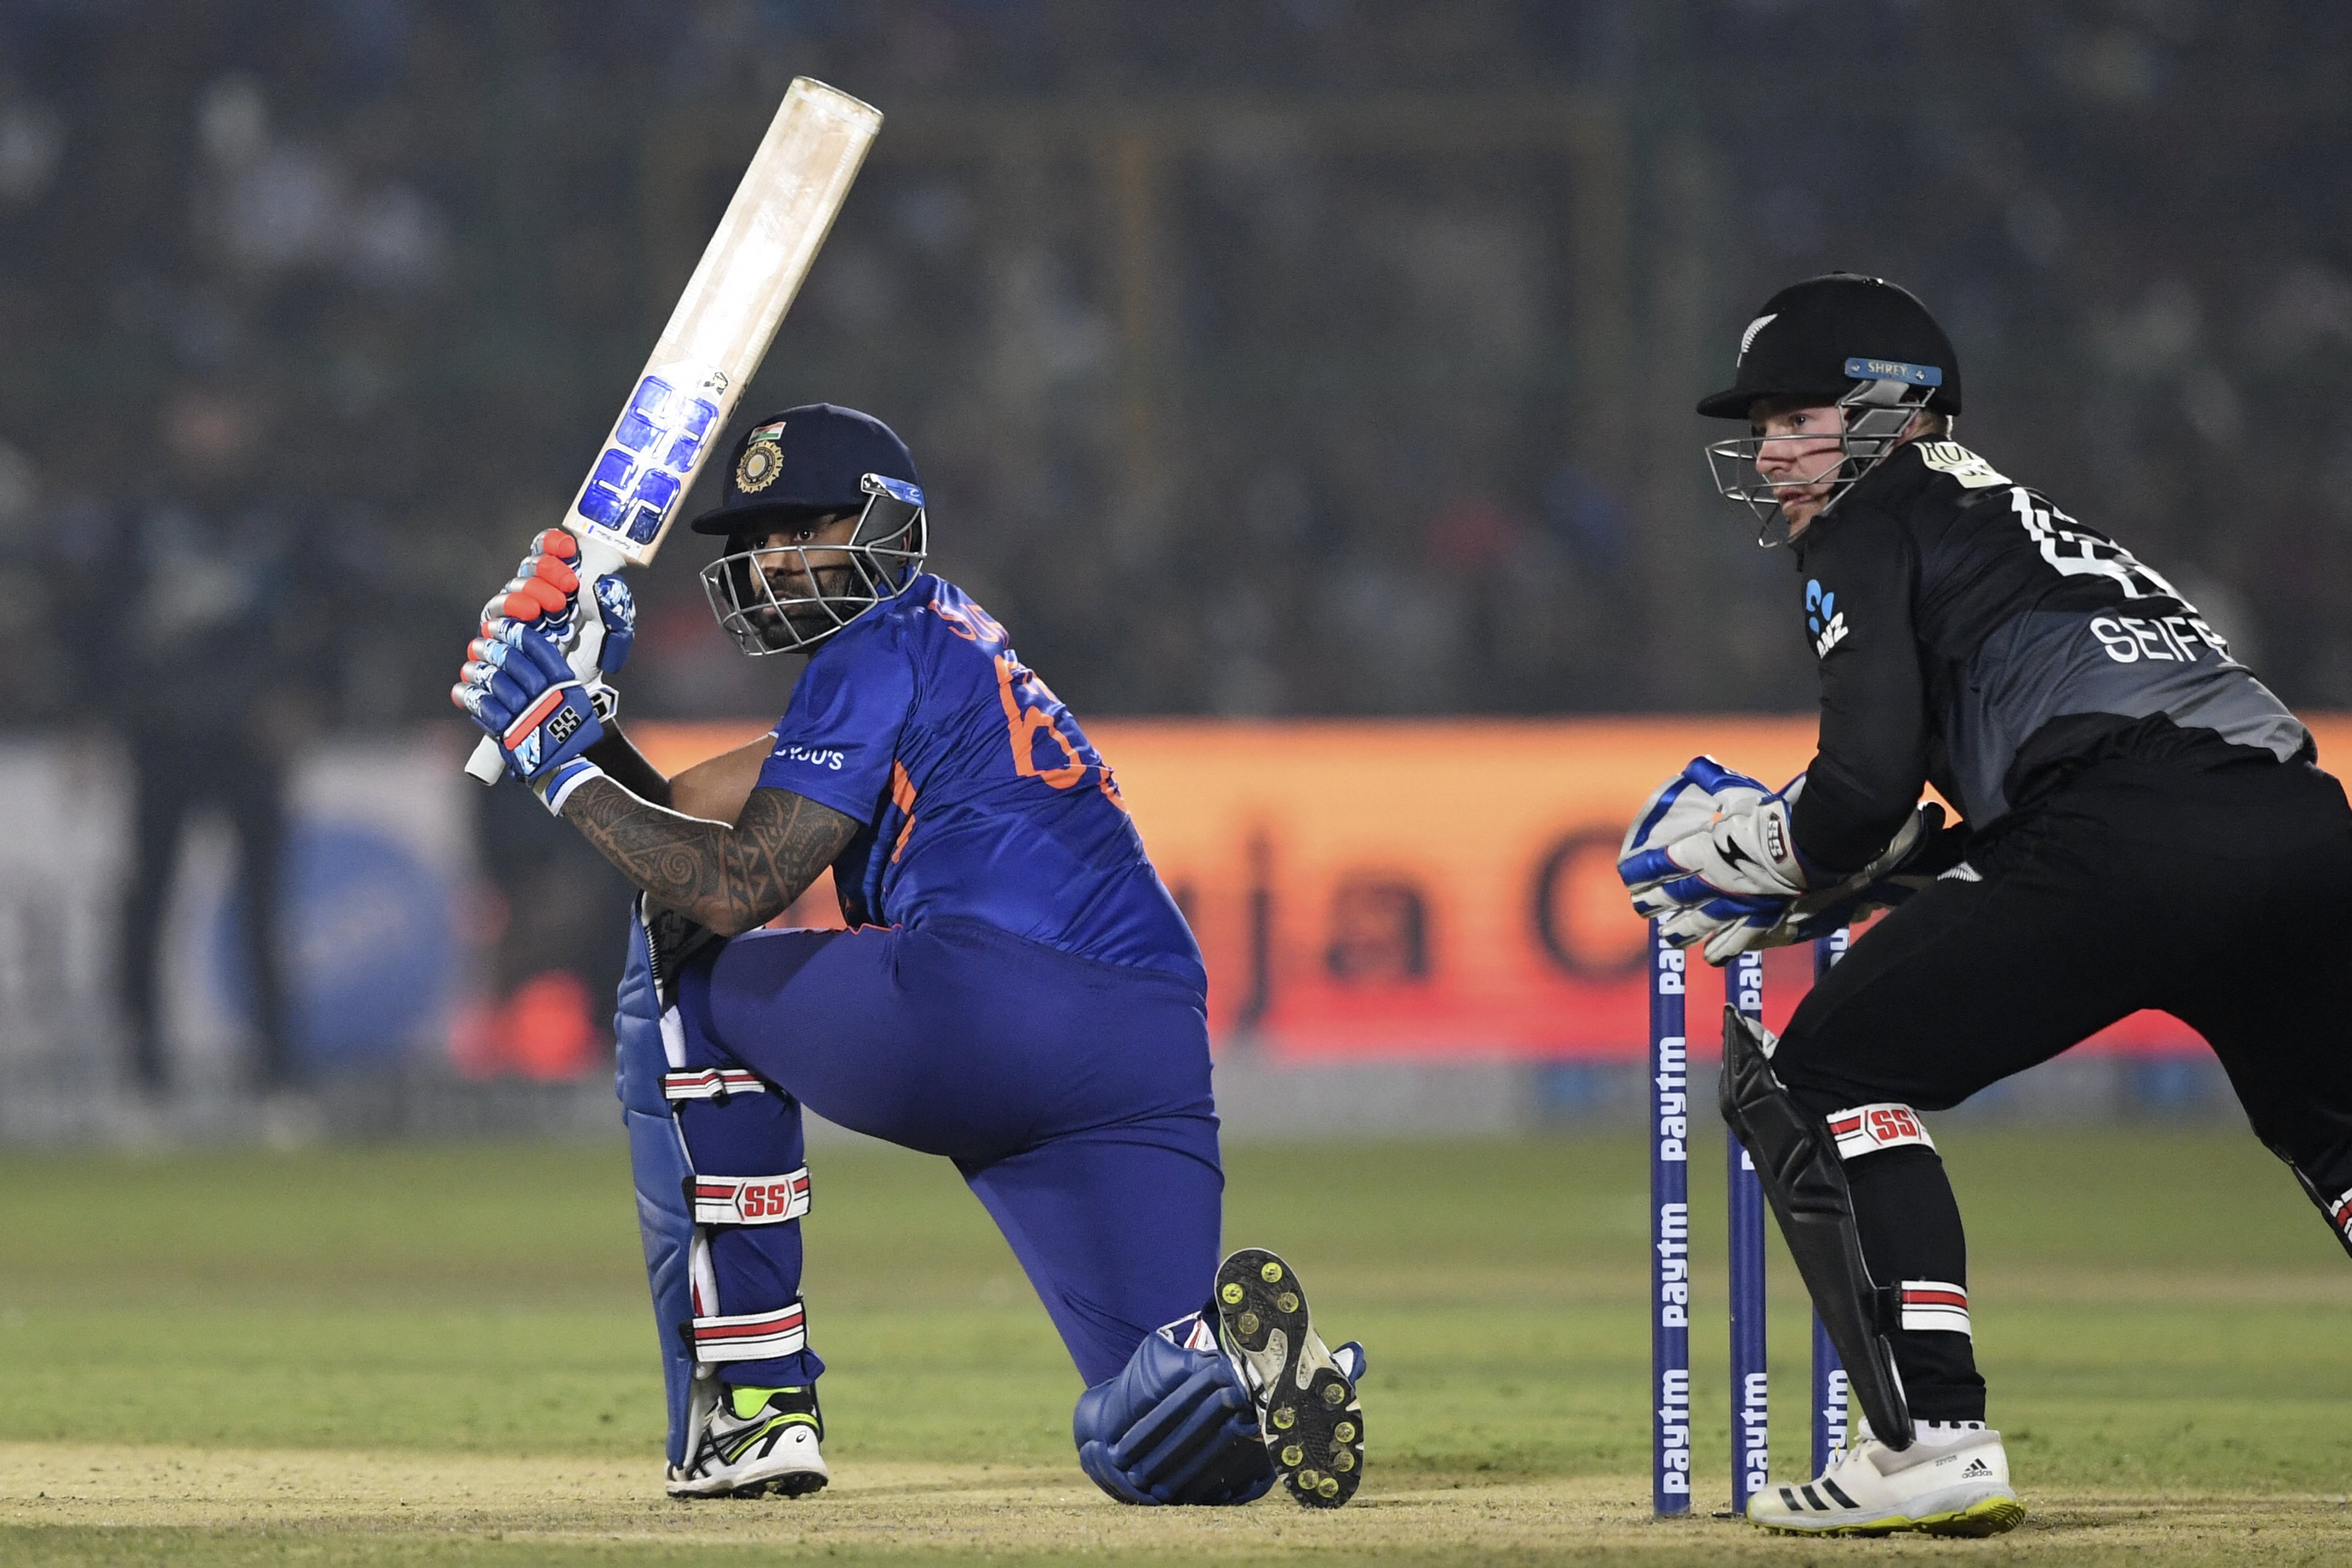 IND vs NZ | New Zealand lost a ‘meaningless’ series against India after T20 World Cup final defeat, says Mitchell McClenaghan